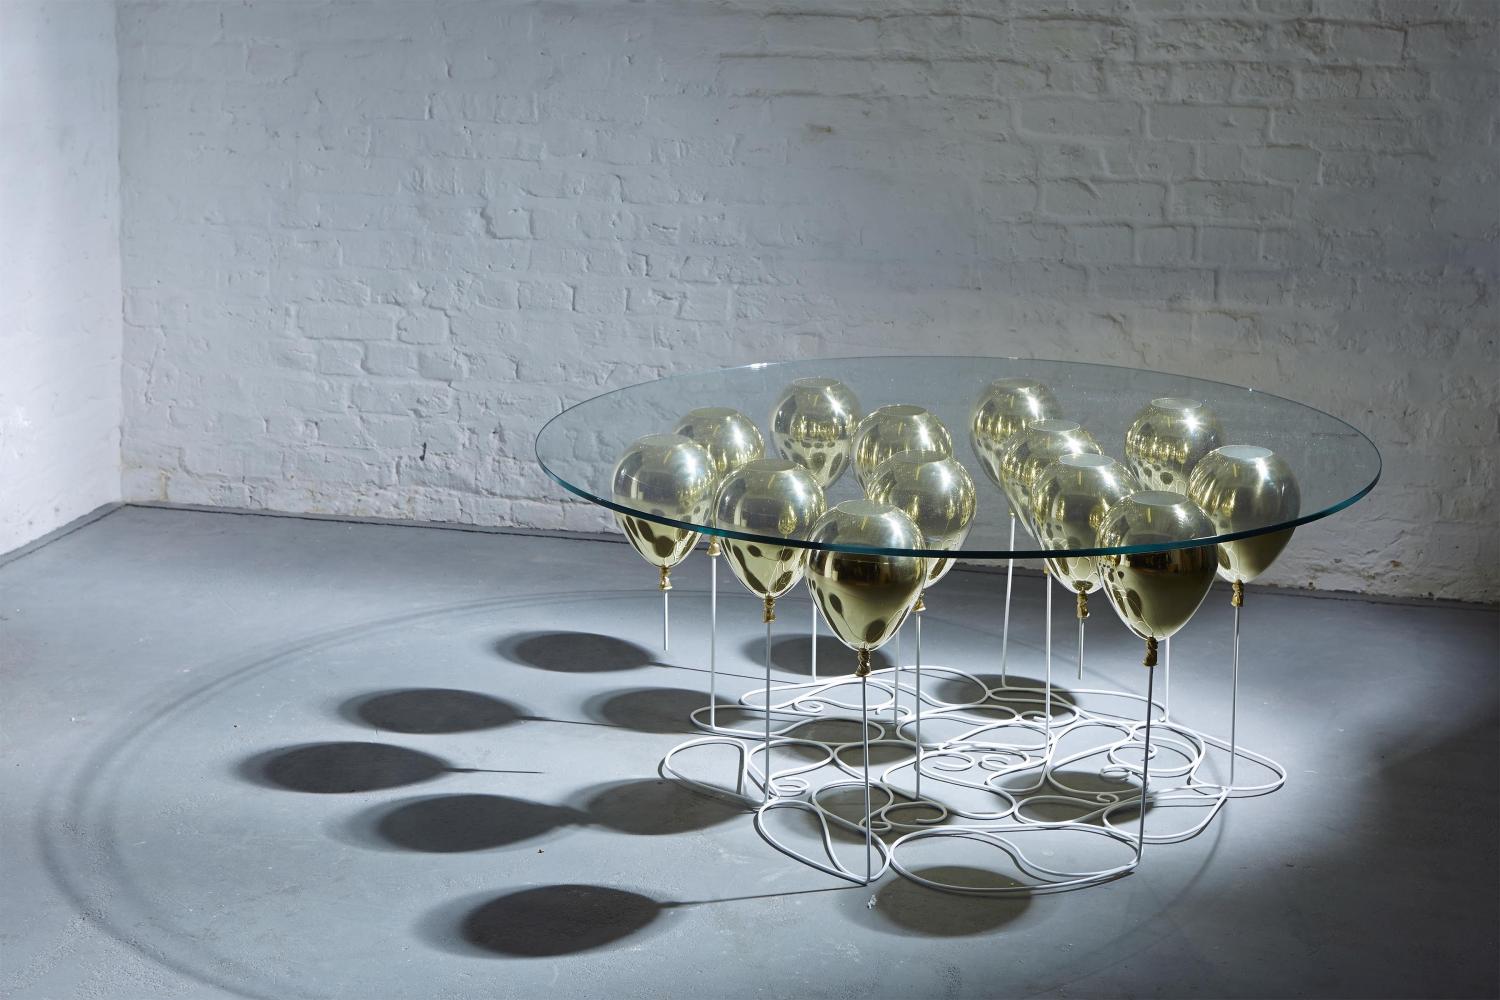 Up Balloon Table - Artsy table using balloons to hold up glass tabletop - Duffy London